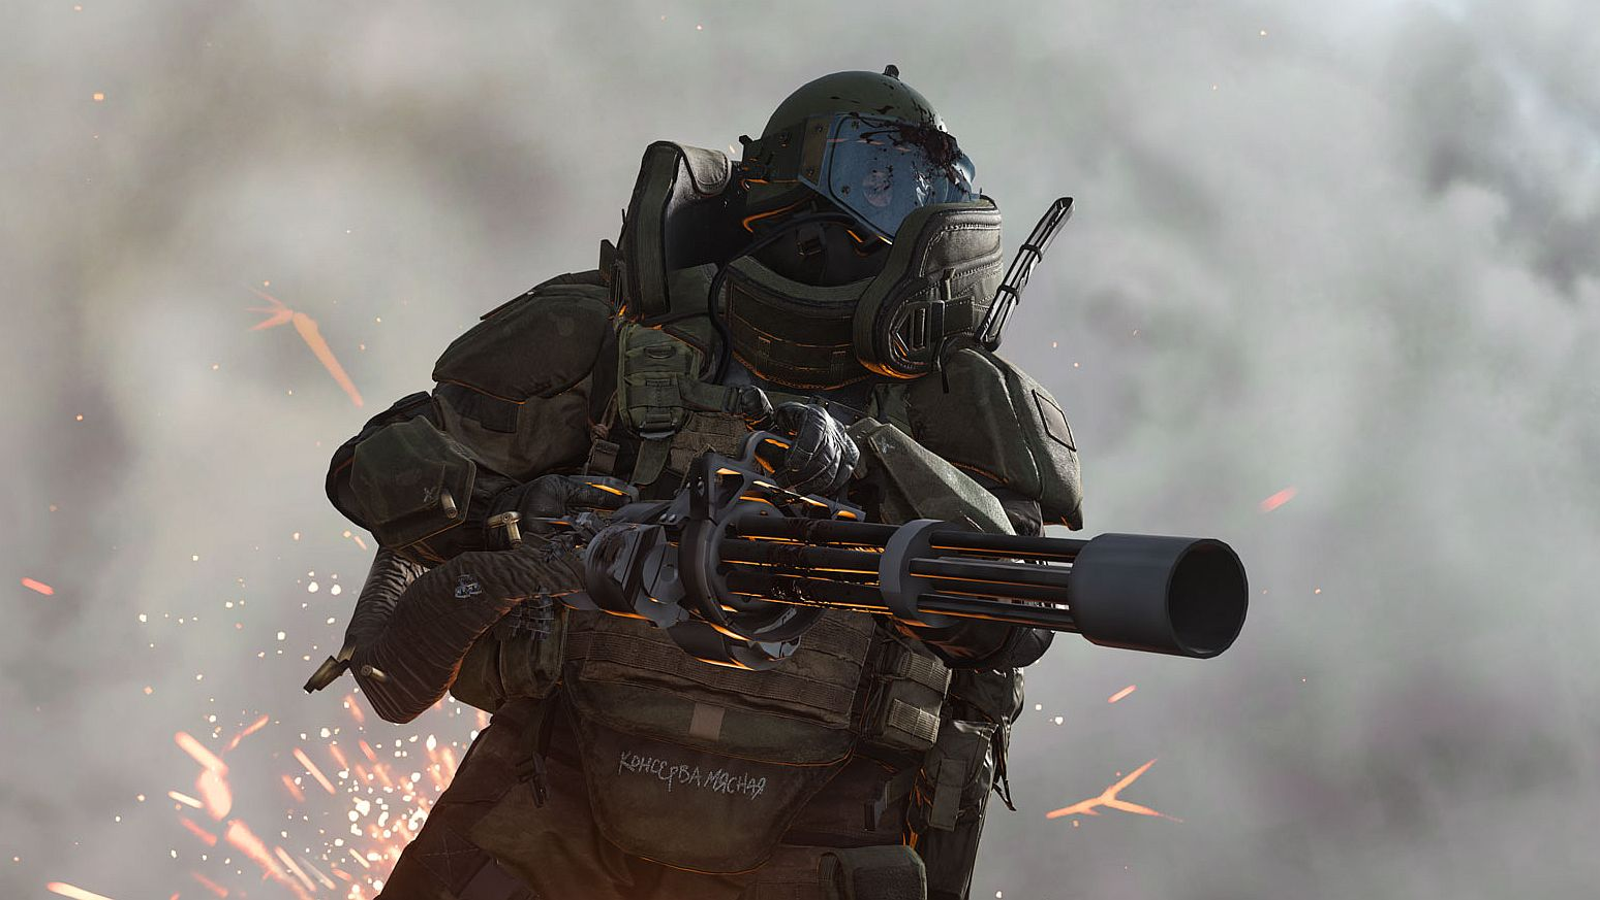 How to play Modern Warfare 2 Multiplayer and Spec Ops early before official  release